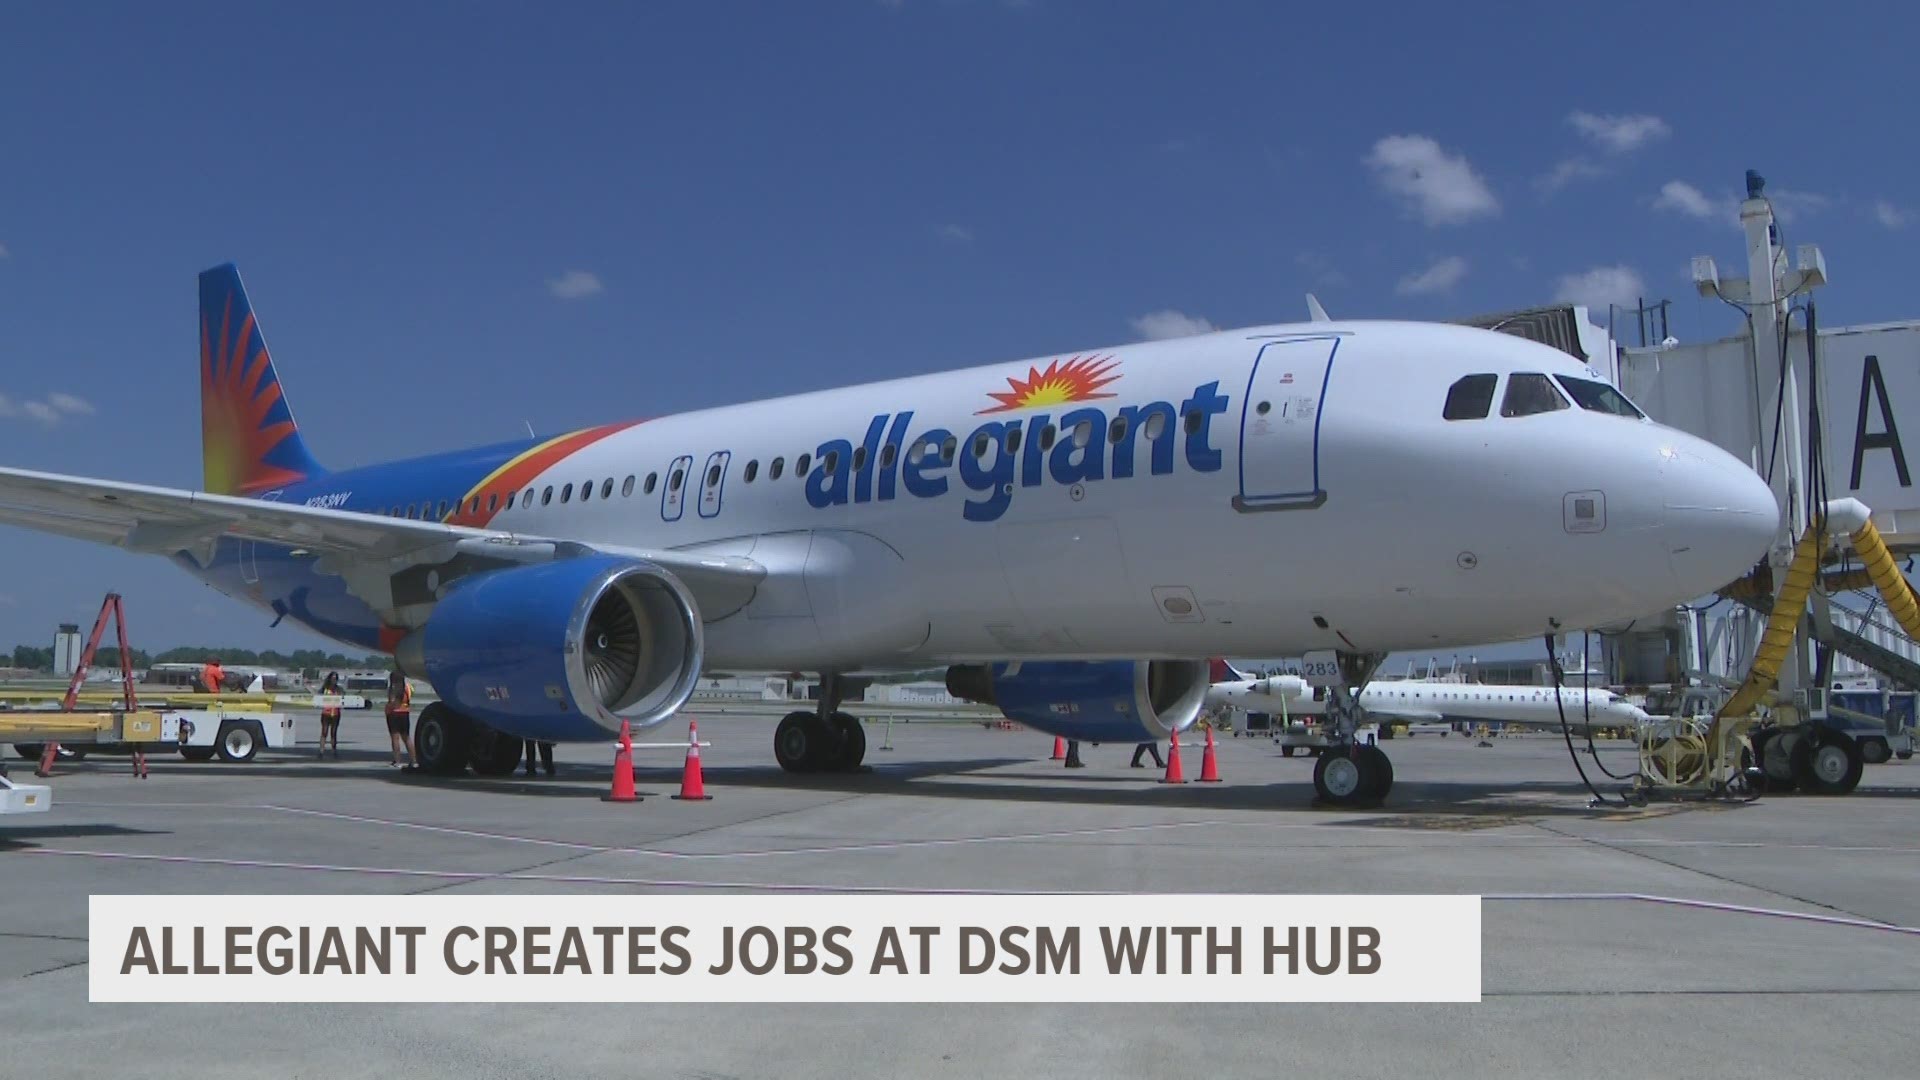 The two new planes at Des Moines International means more connectivity for you since the airline allows new cities for you to fly to from Des Moines.